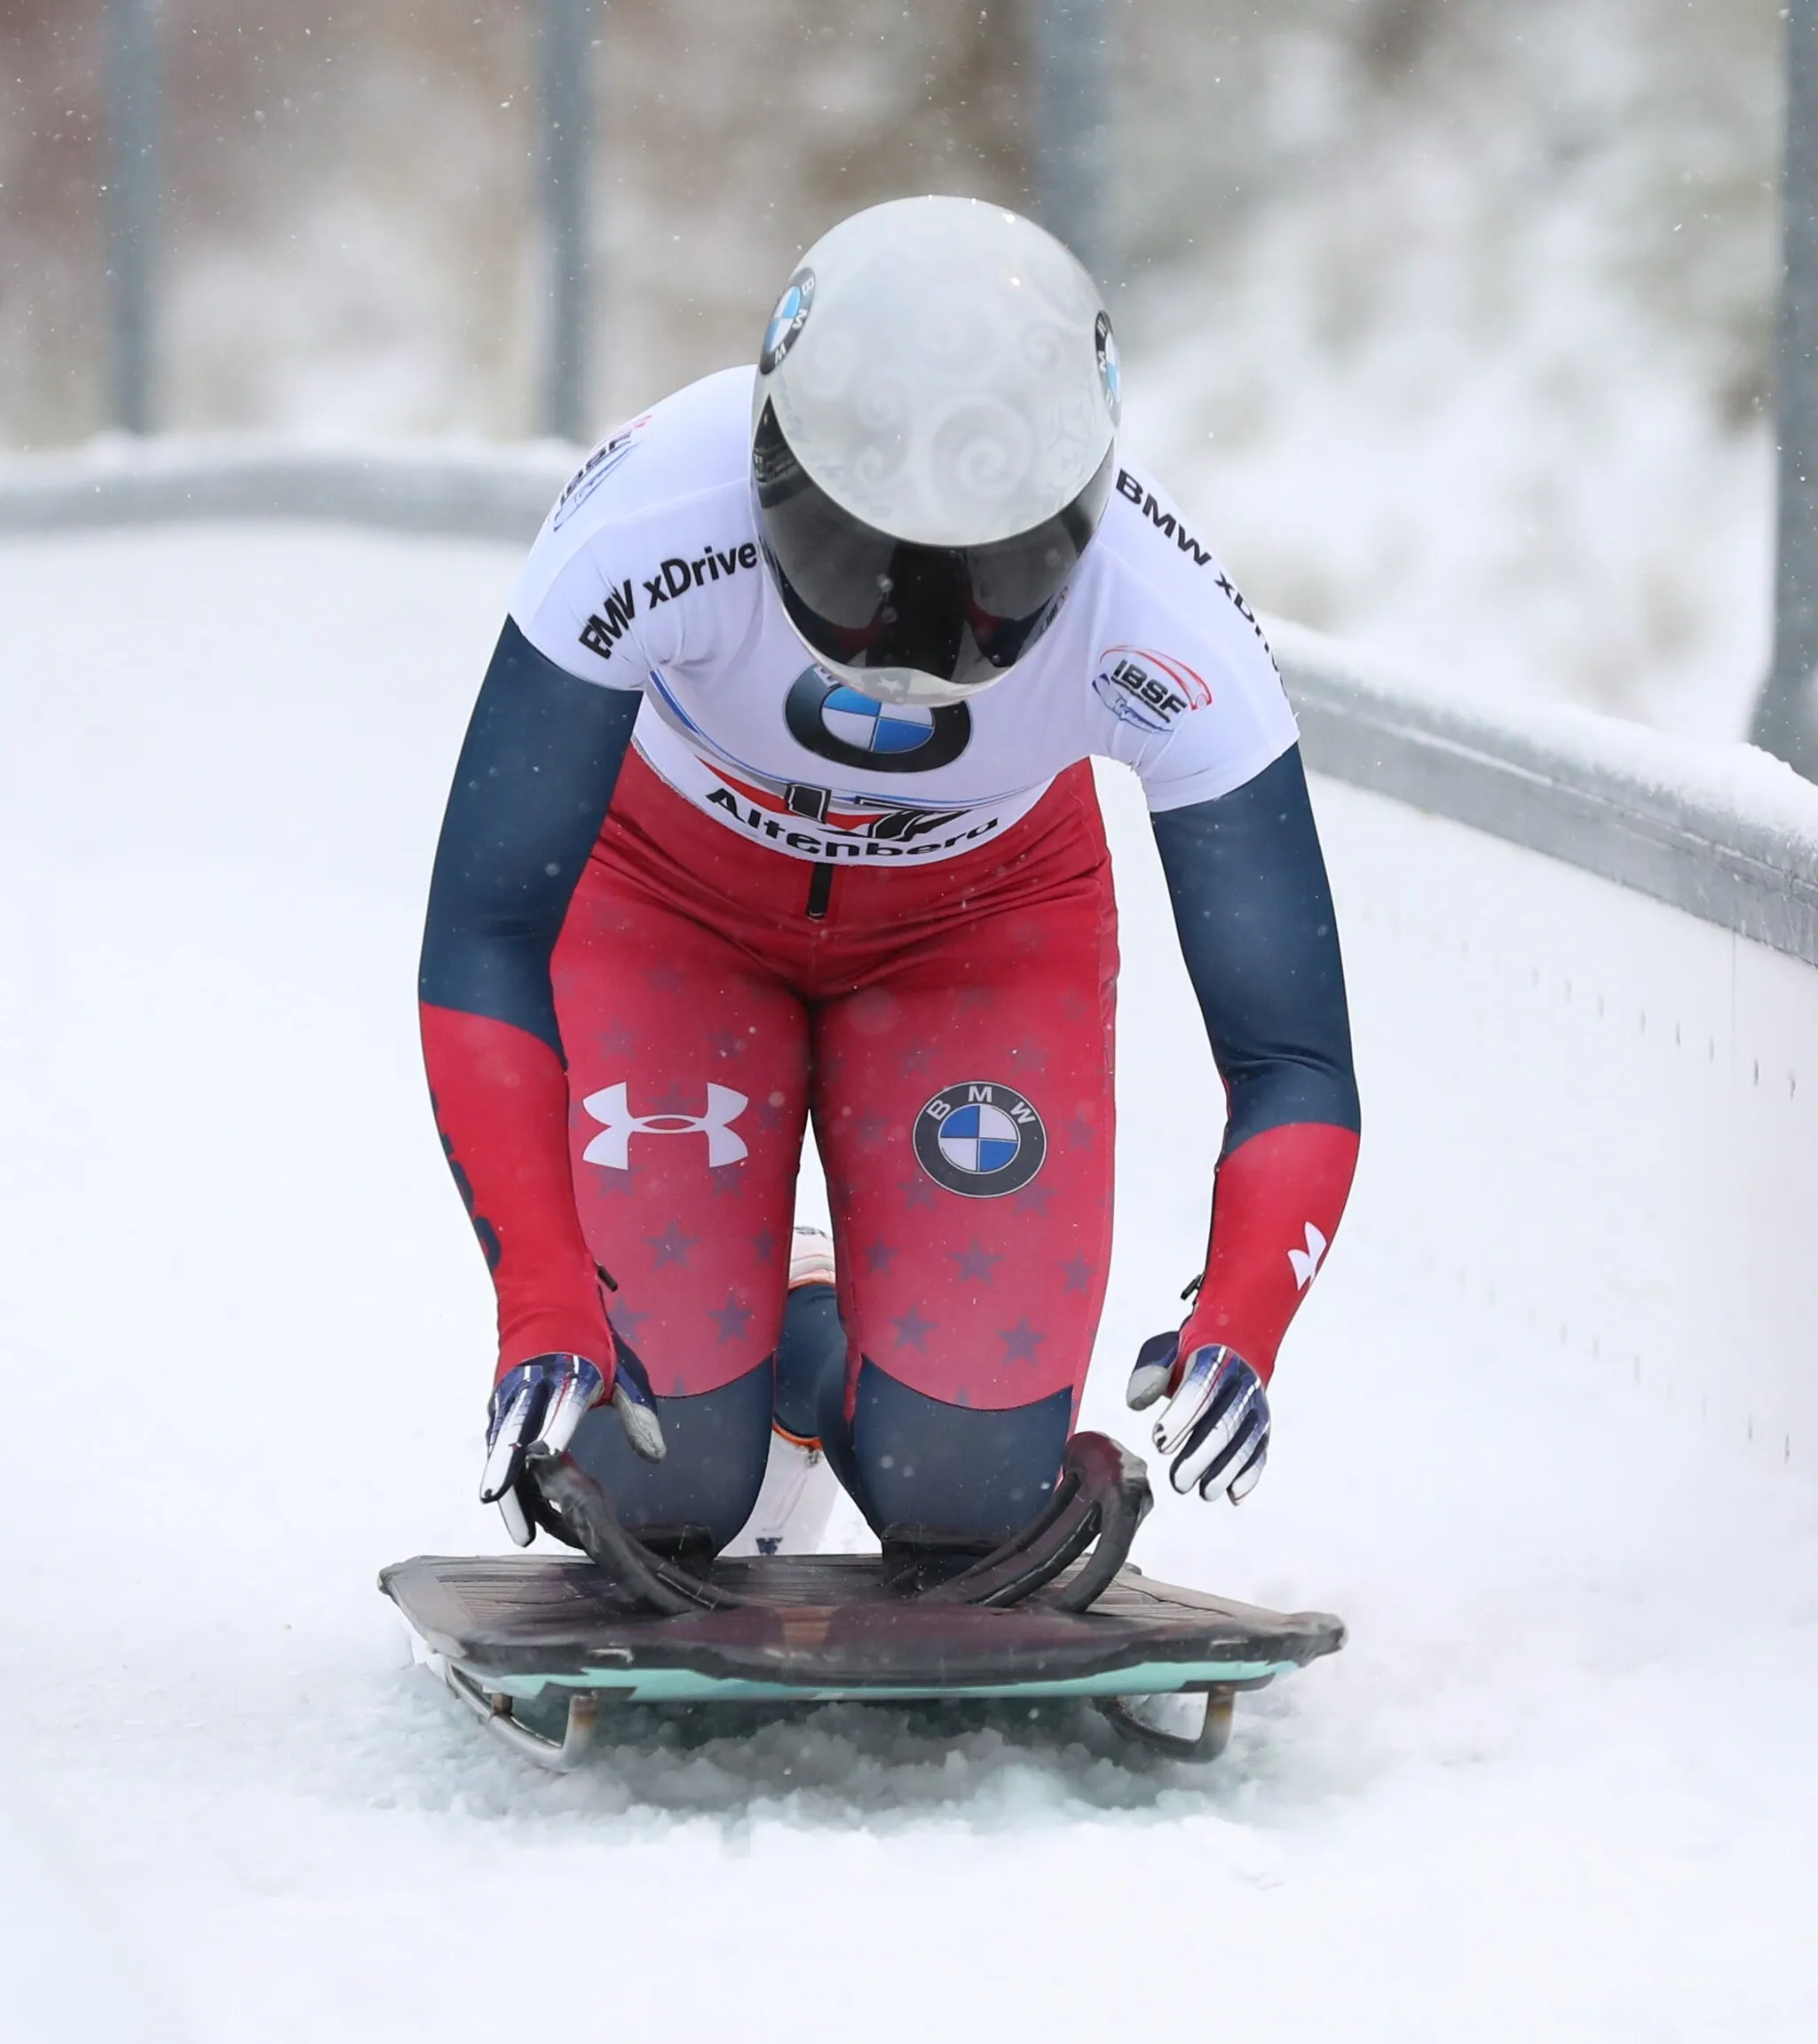 Photo showing: Women's World Cup race at the 2018/19 Skeleton World Cup in Altenberg